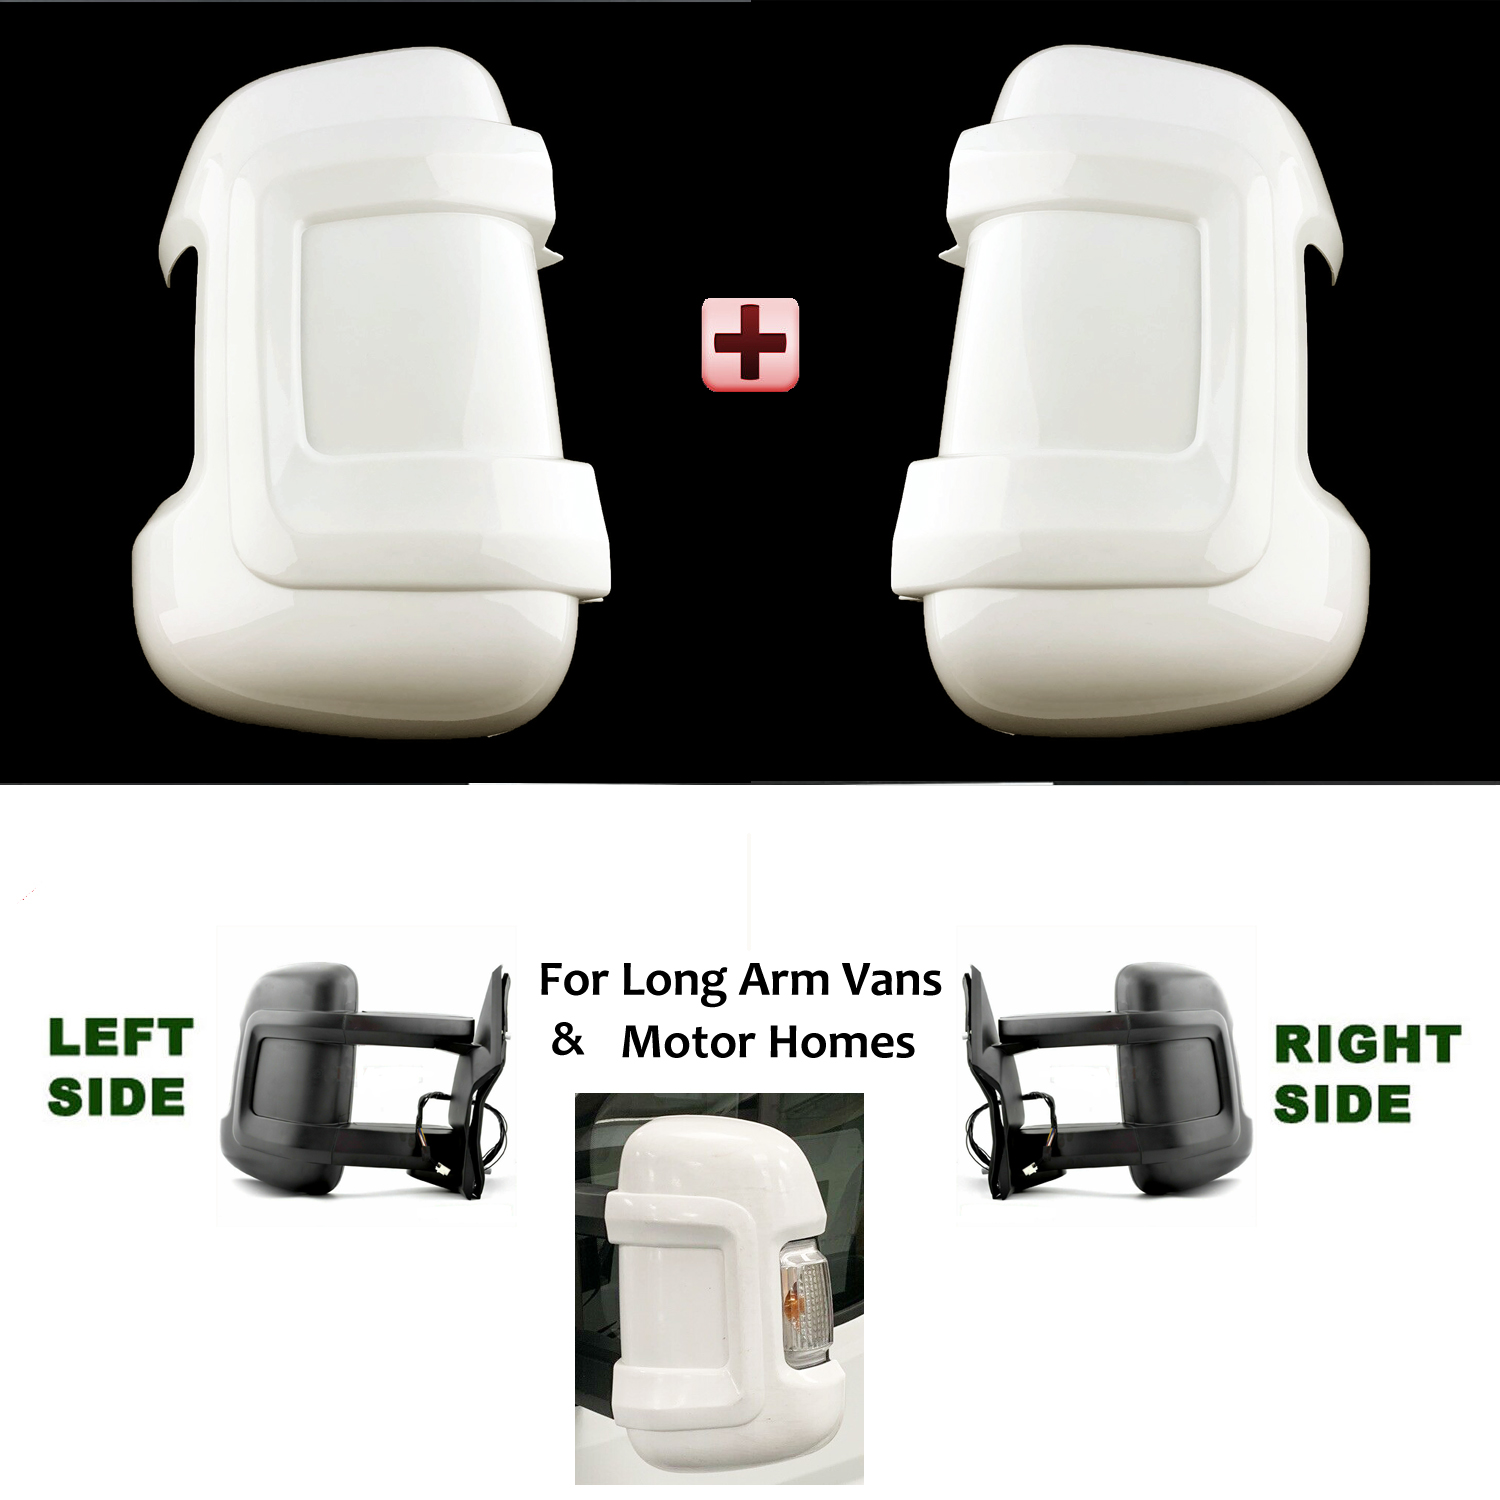 FIAT Ducato Wing Mirror Cover Protectors LEFT and RIGHT (PAIR ) 2006 to 2021 – Gloss White Wing Mirror Cover Protector With Arms ( LONG Arm Vans )